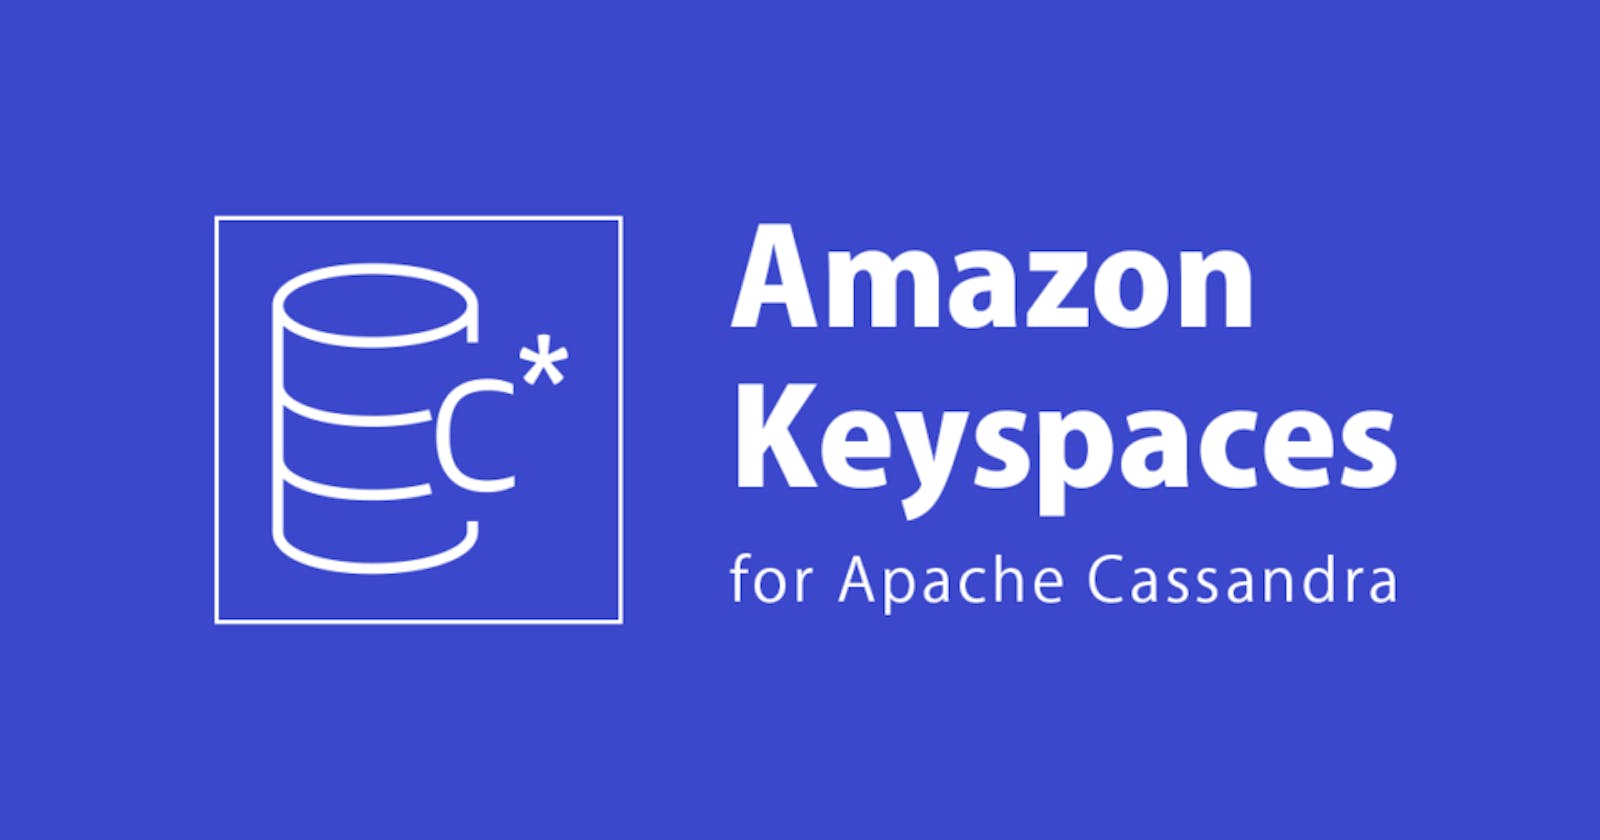 A Beginner's Guide to Using Amazon Keyspaces in AWS